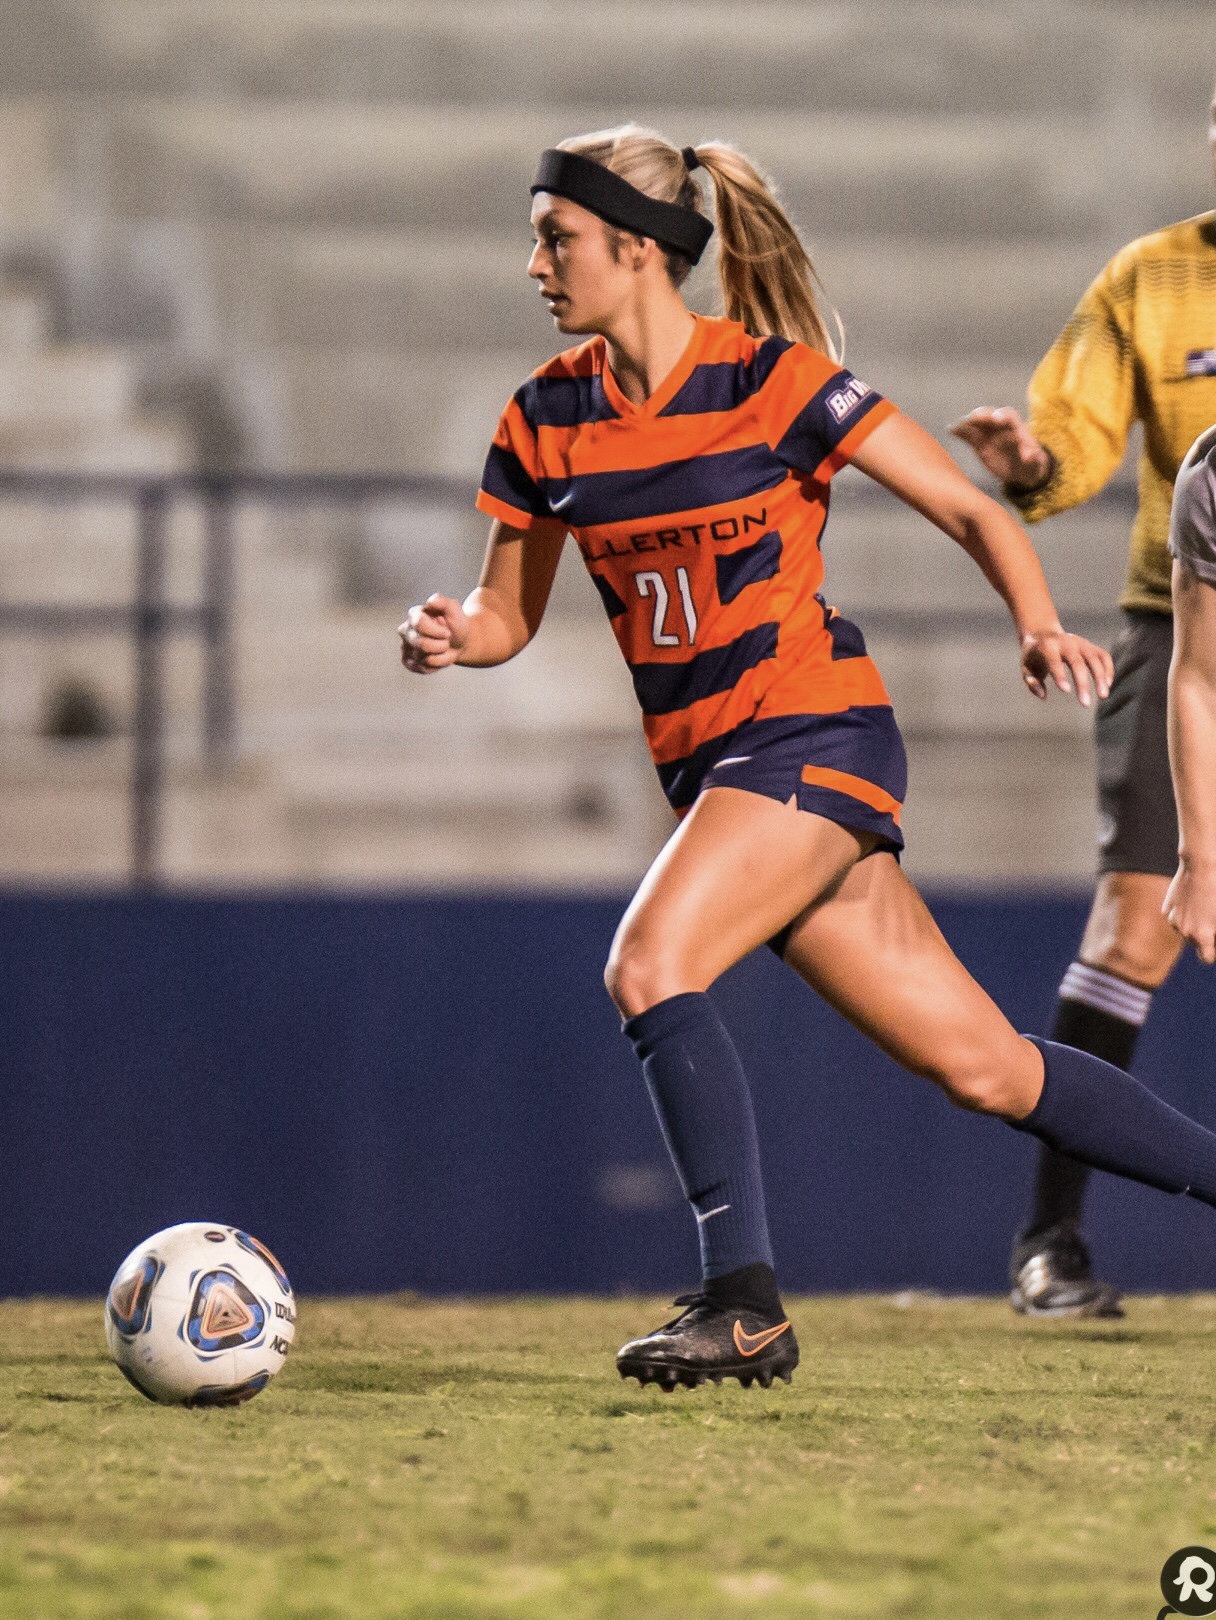 Kaycee Hoover CSUF soccer player